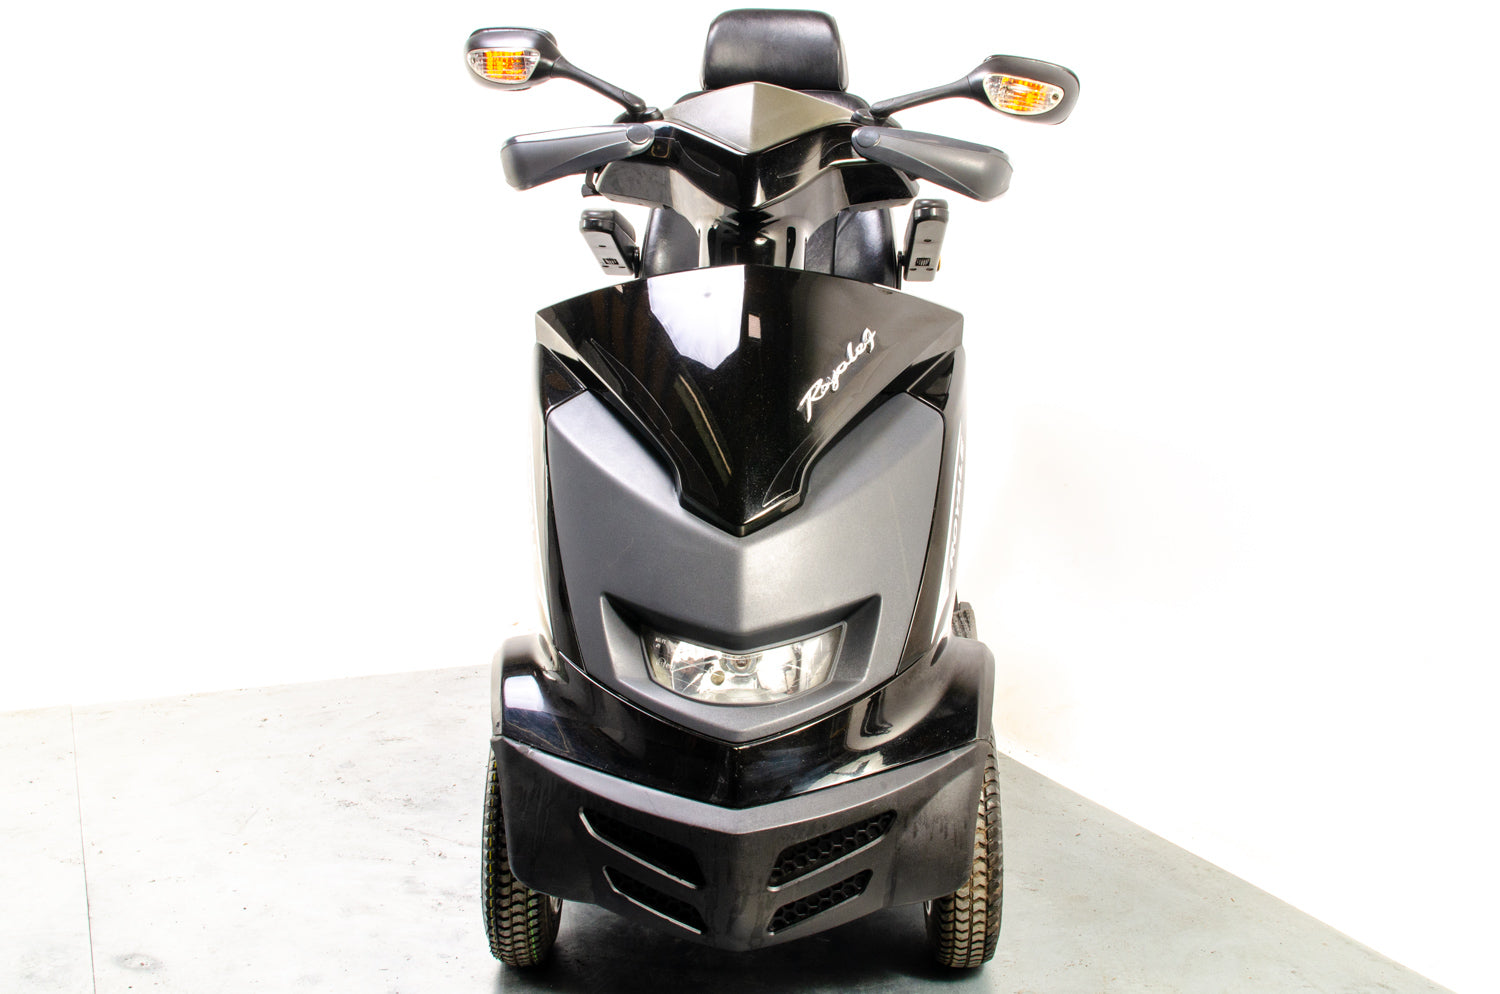 Drive Royale 4 Used Mobility Scooter 8mph Large Comfort Class 3 Road Legal Luxury 13286